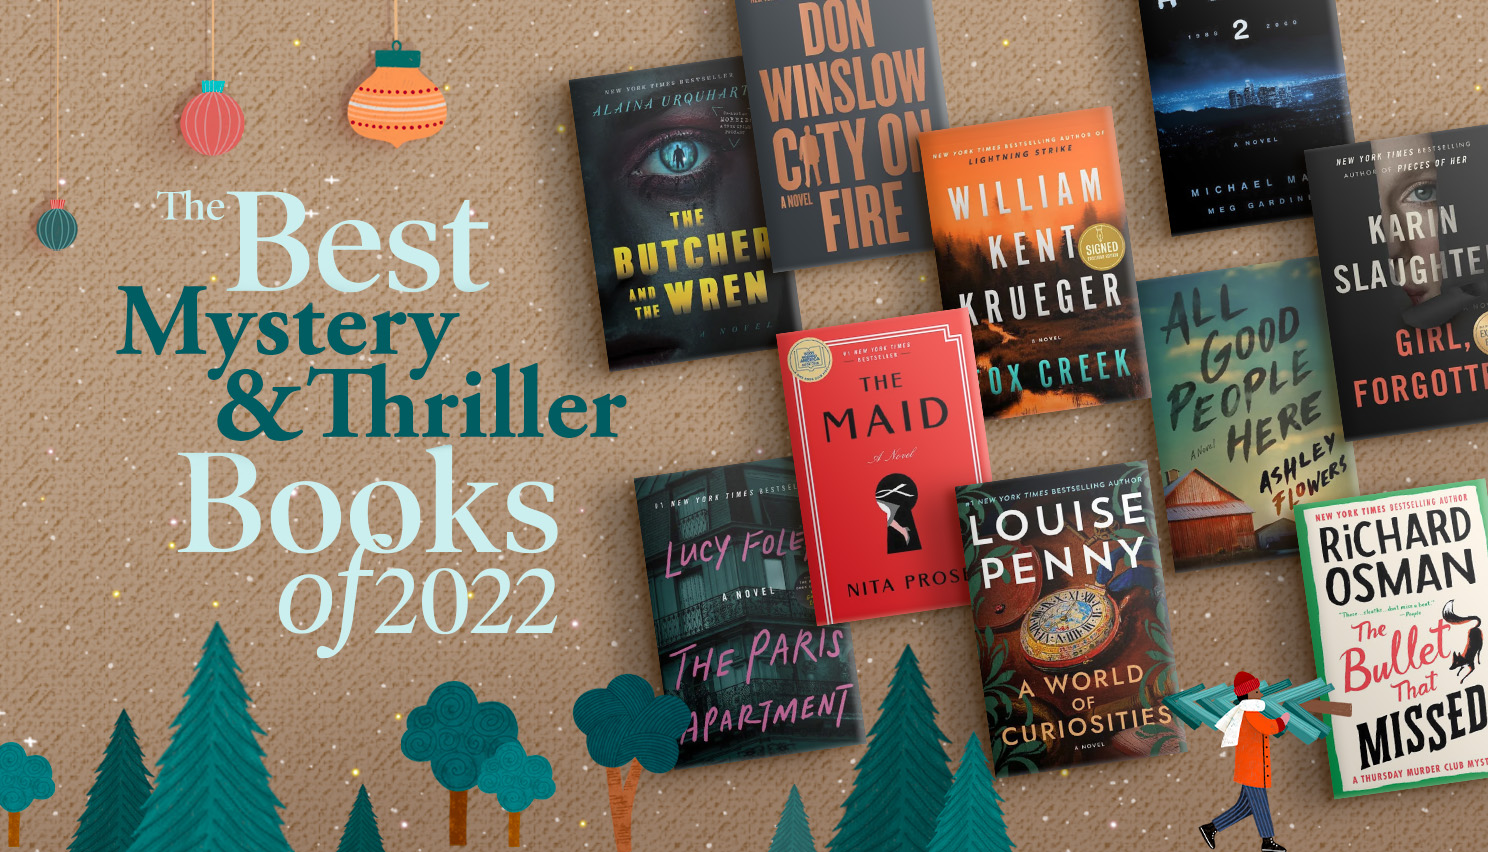 The Best Mystery & Thriller Books of 2022 B&N Reads